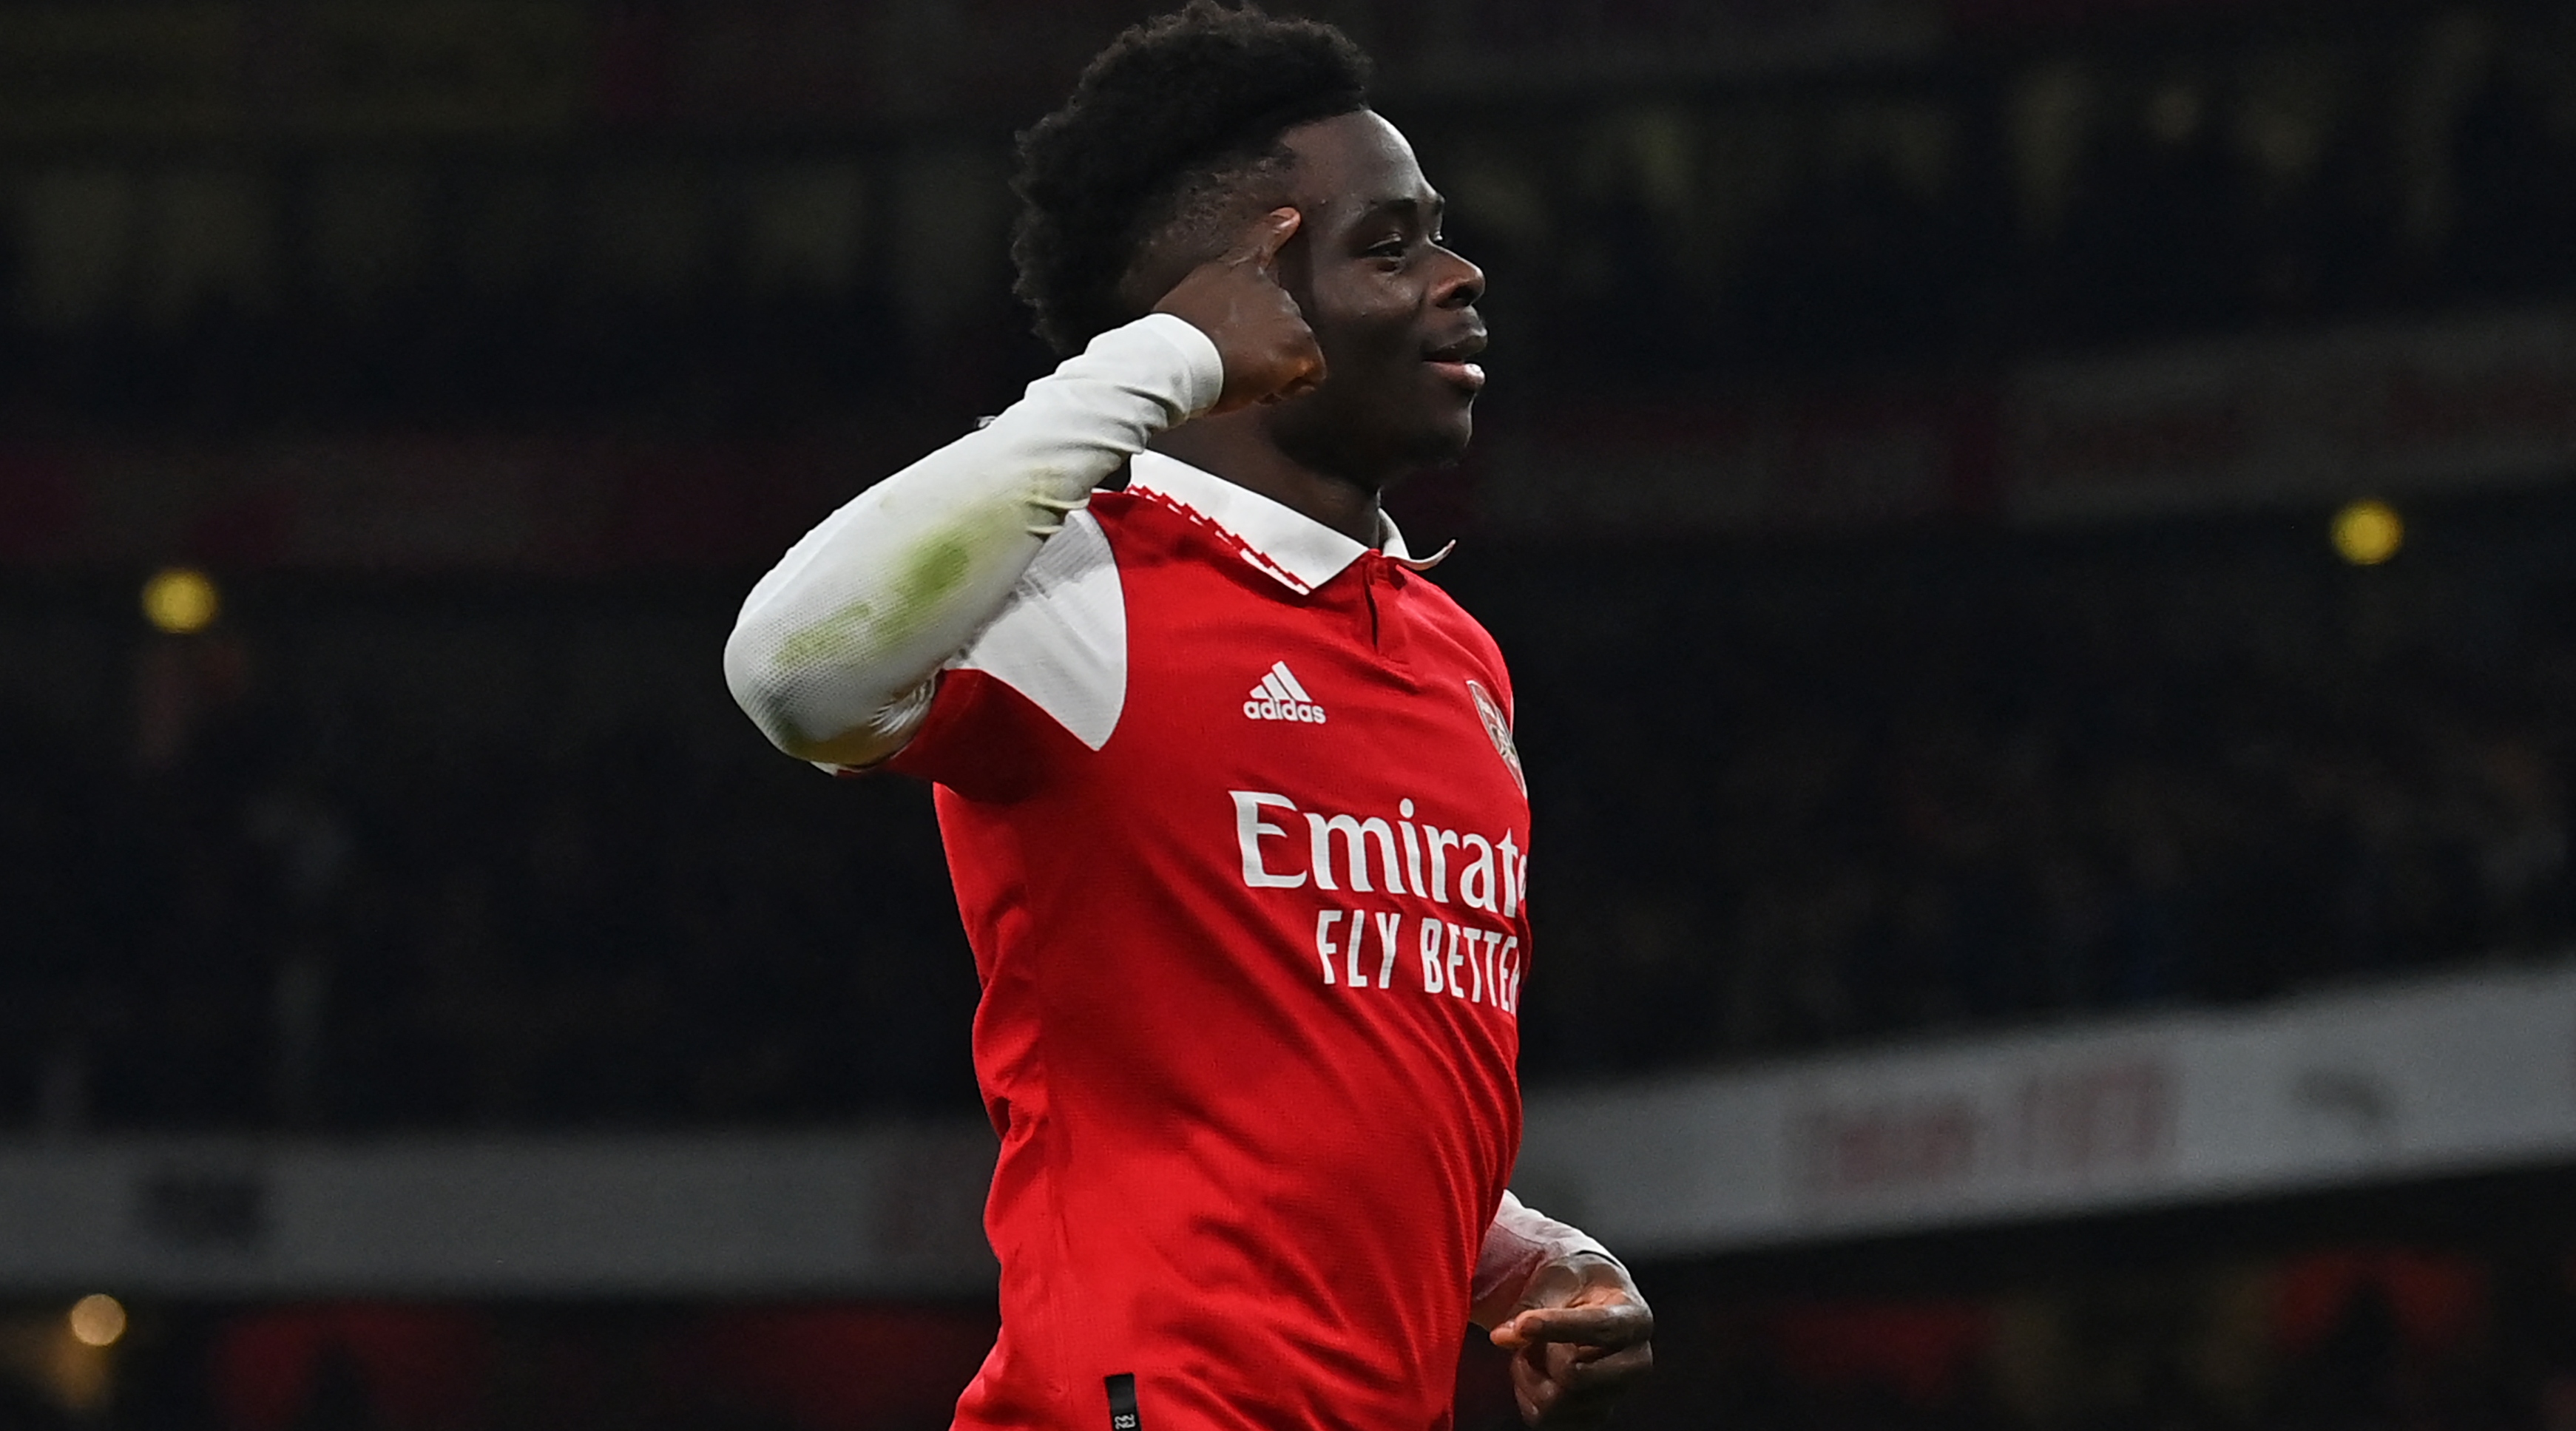 Bukayo Saka of Arsenal celebrates after scoring his team's second goal during the Premier League match between Arsenal and Manchester United on 22 January, 2023 at the Emirates Stadium in London, United Kingdom.